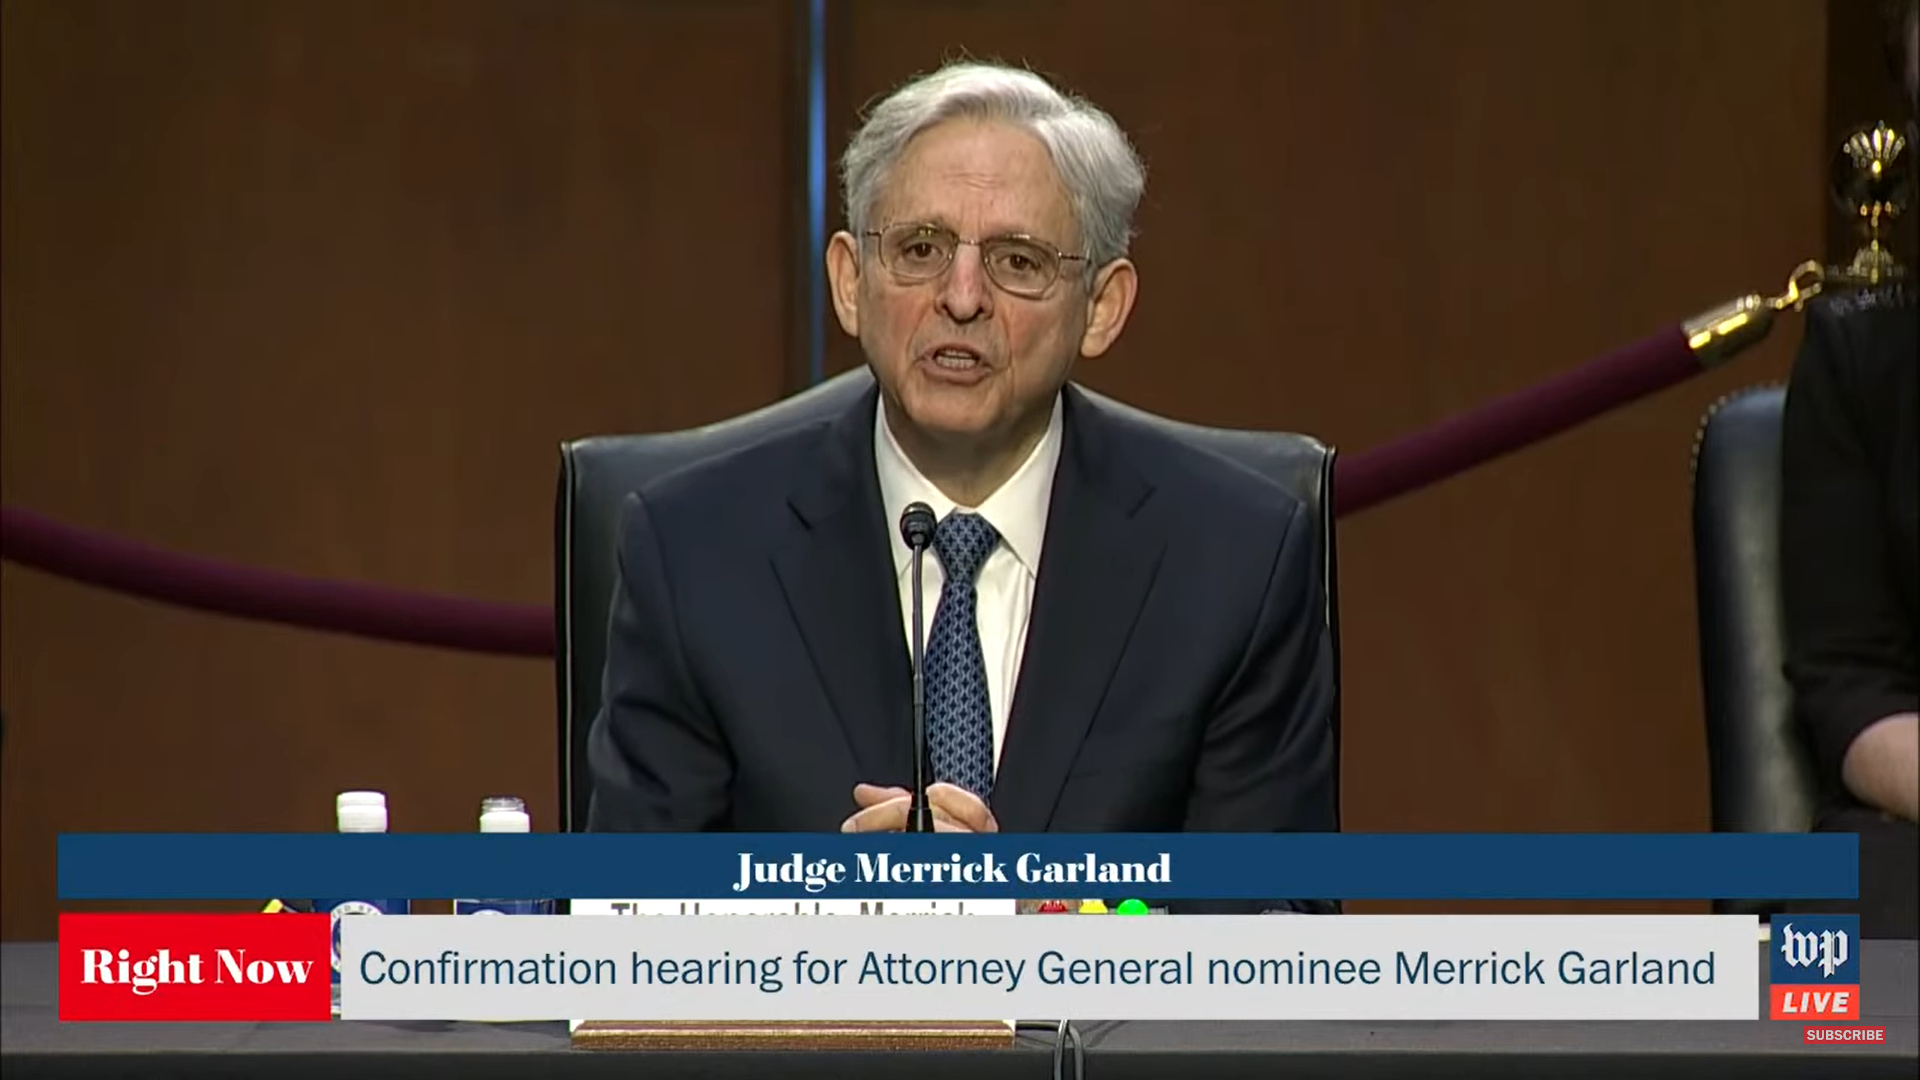 20 GOPers Who Helped Confirm Garland Owe America An Apology